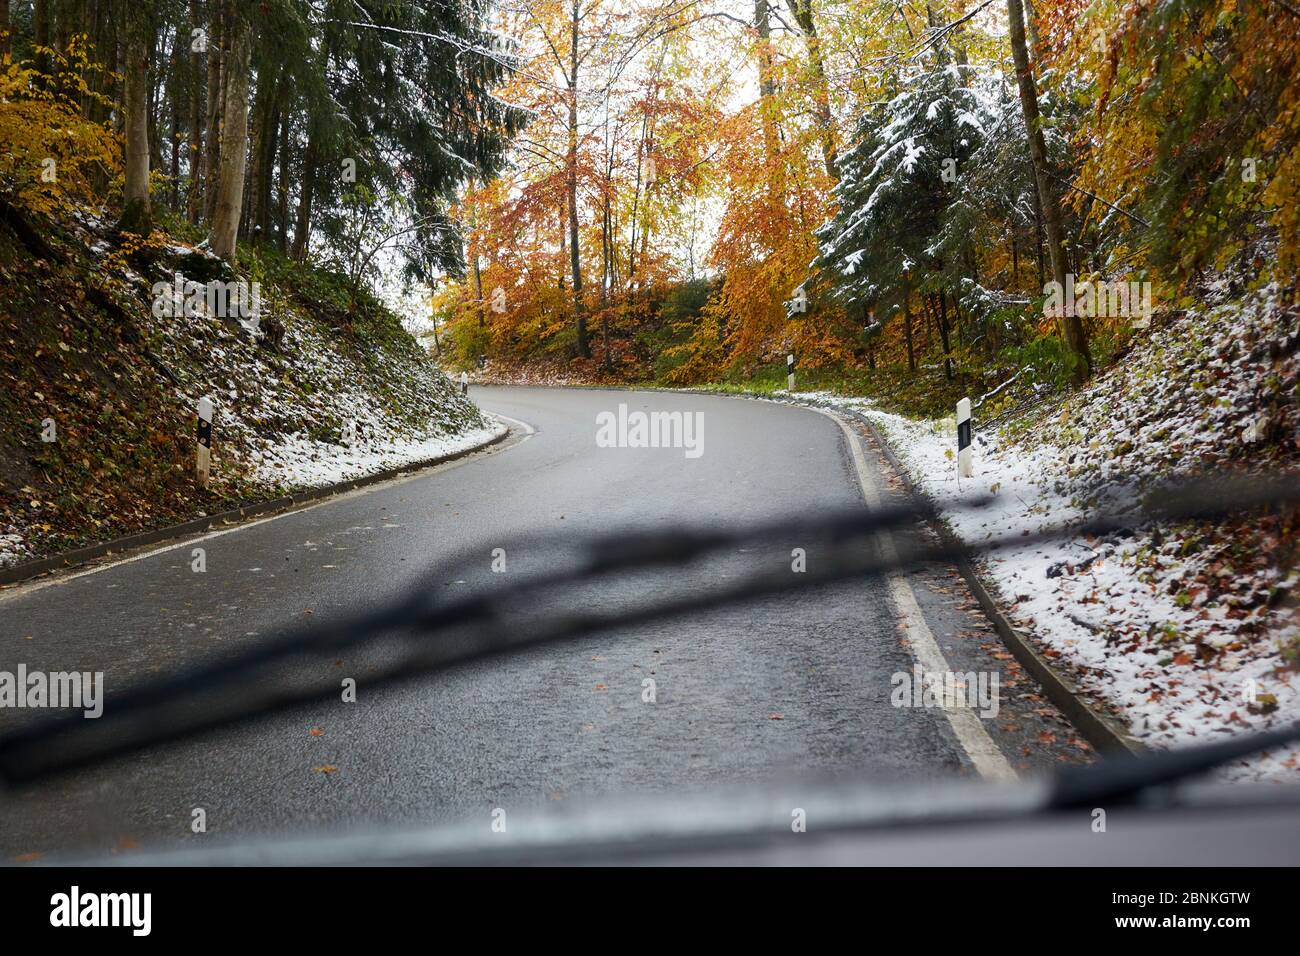 Road, leaves, ice, snow, forest, driver's perspective, wipers Stock Photo